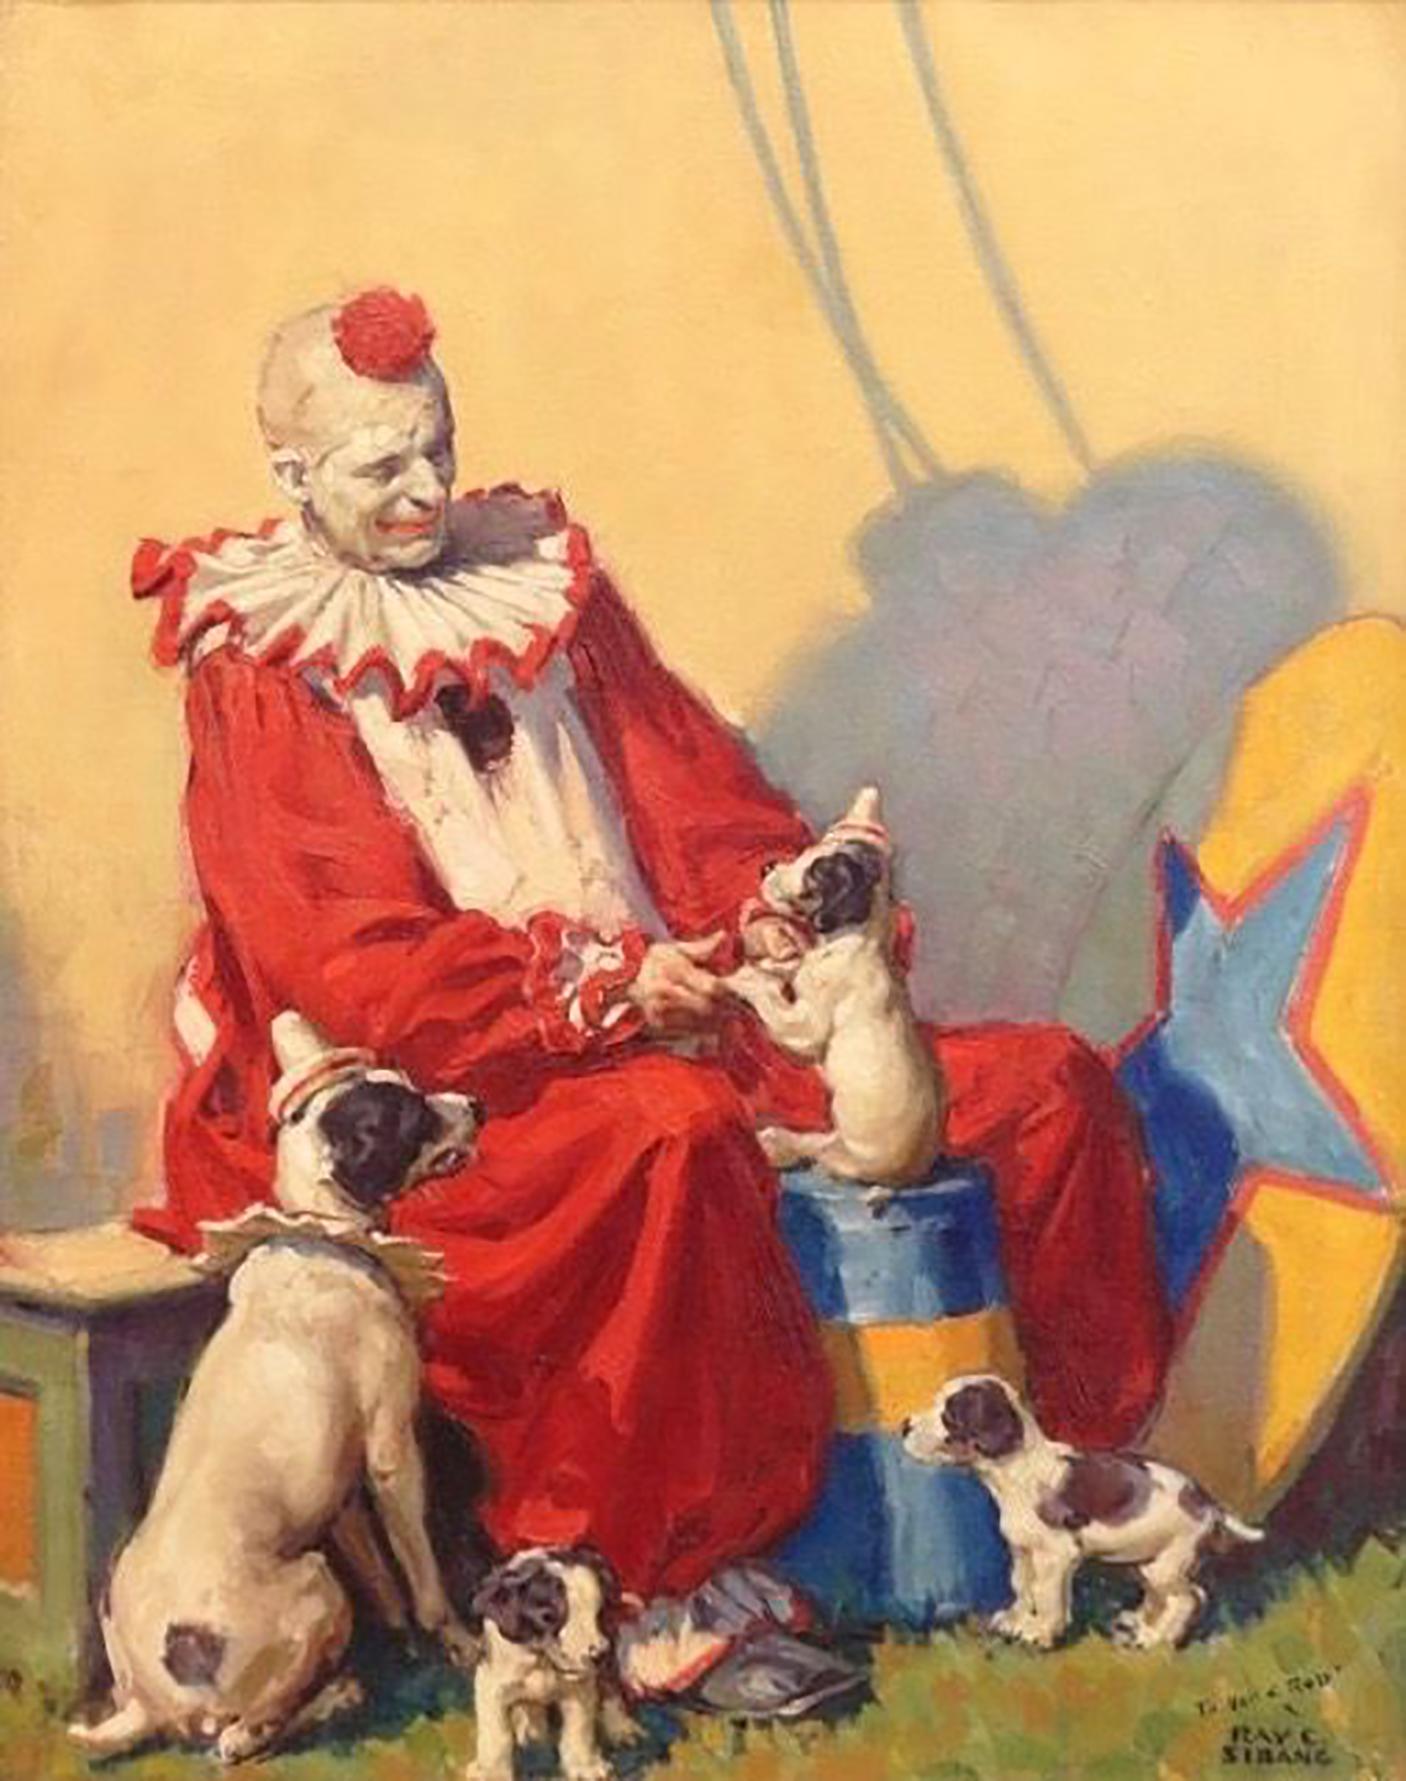 Ray Strang Figurative Painting - Circus Clown with Dogs, Cover for Country Gentleman, April 1929